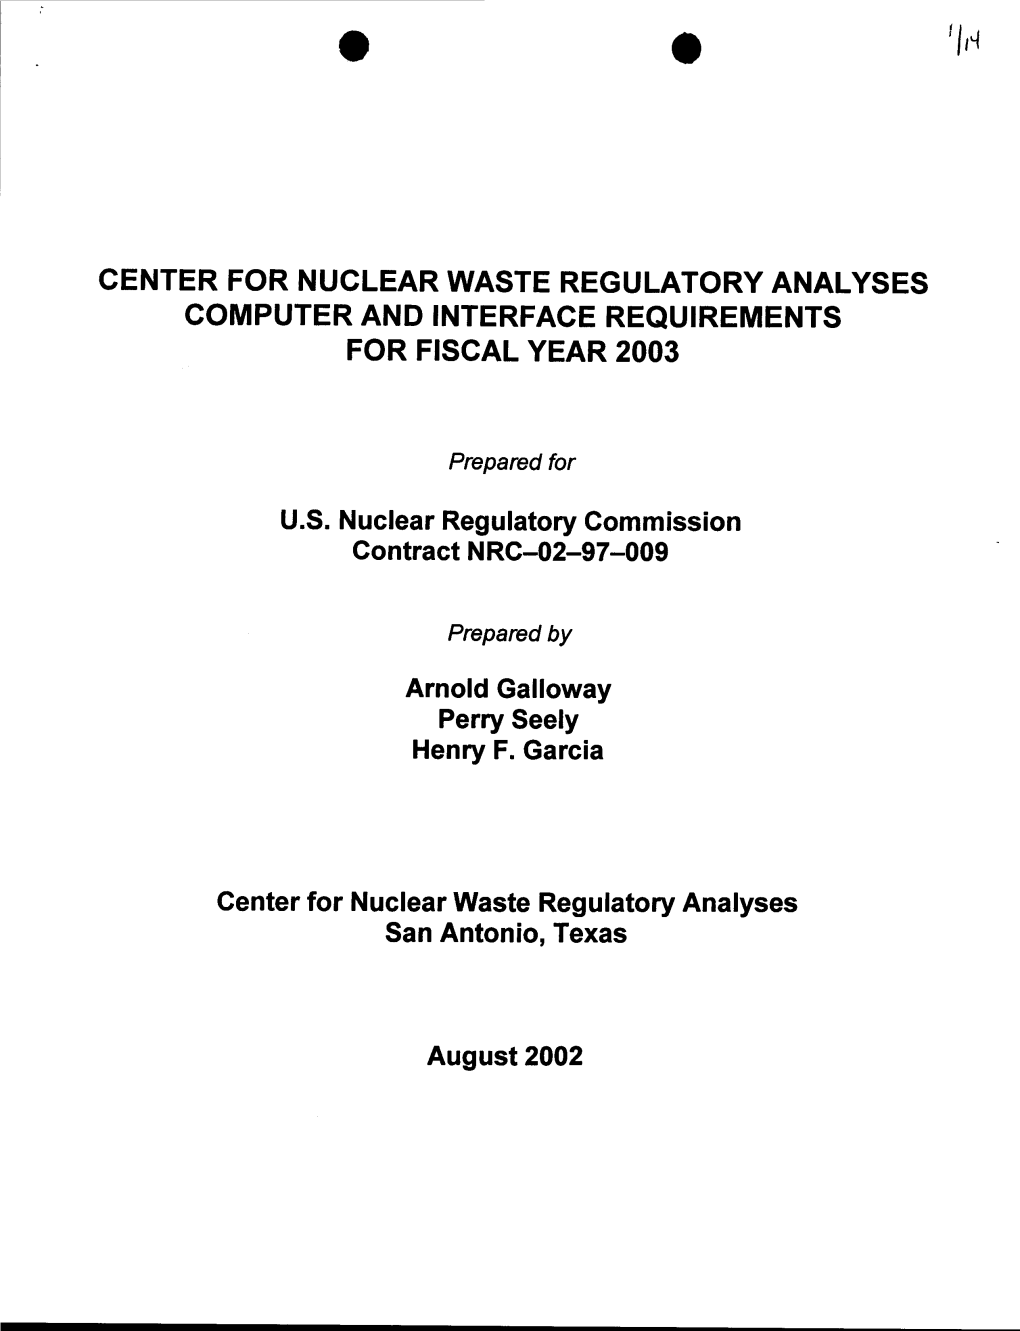 "Center for Nuclear Waste Regulatory Analyses Computer and Interface Requirements for Fiscal Year 2003" -Letter Report